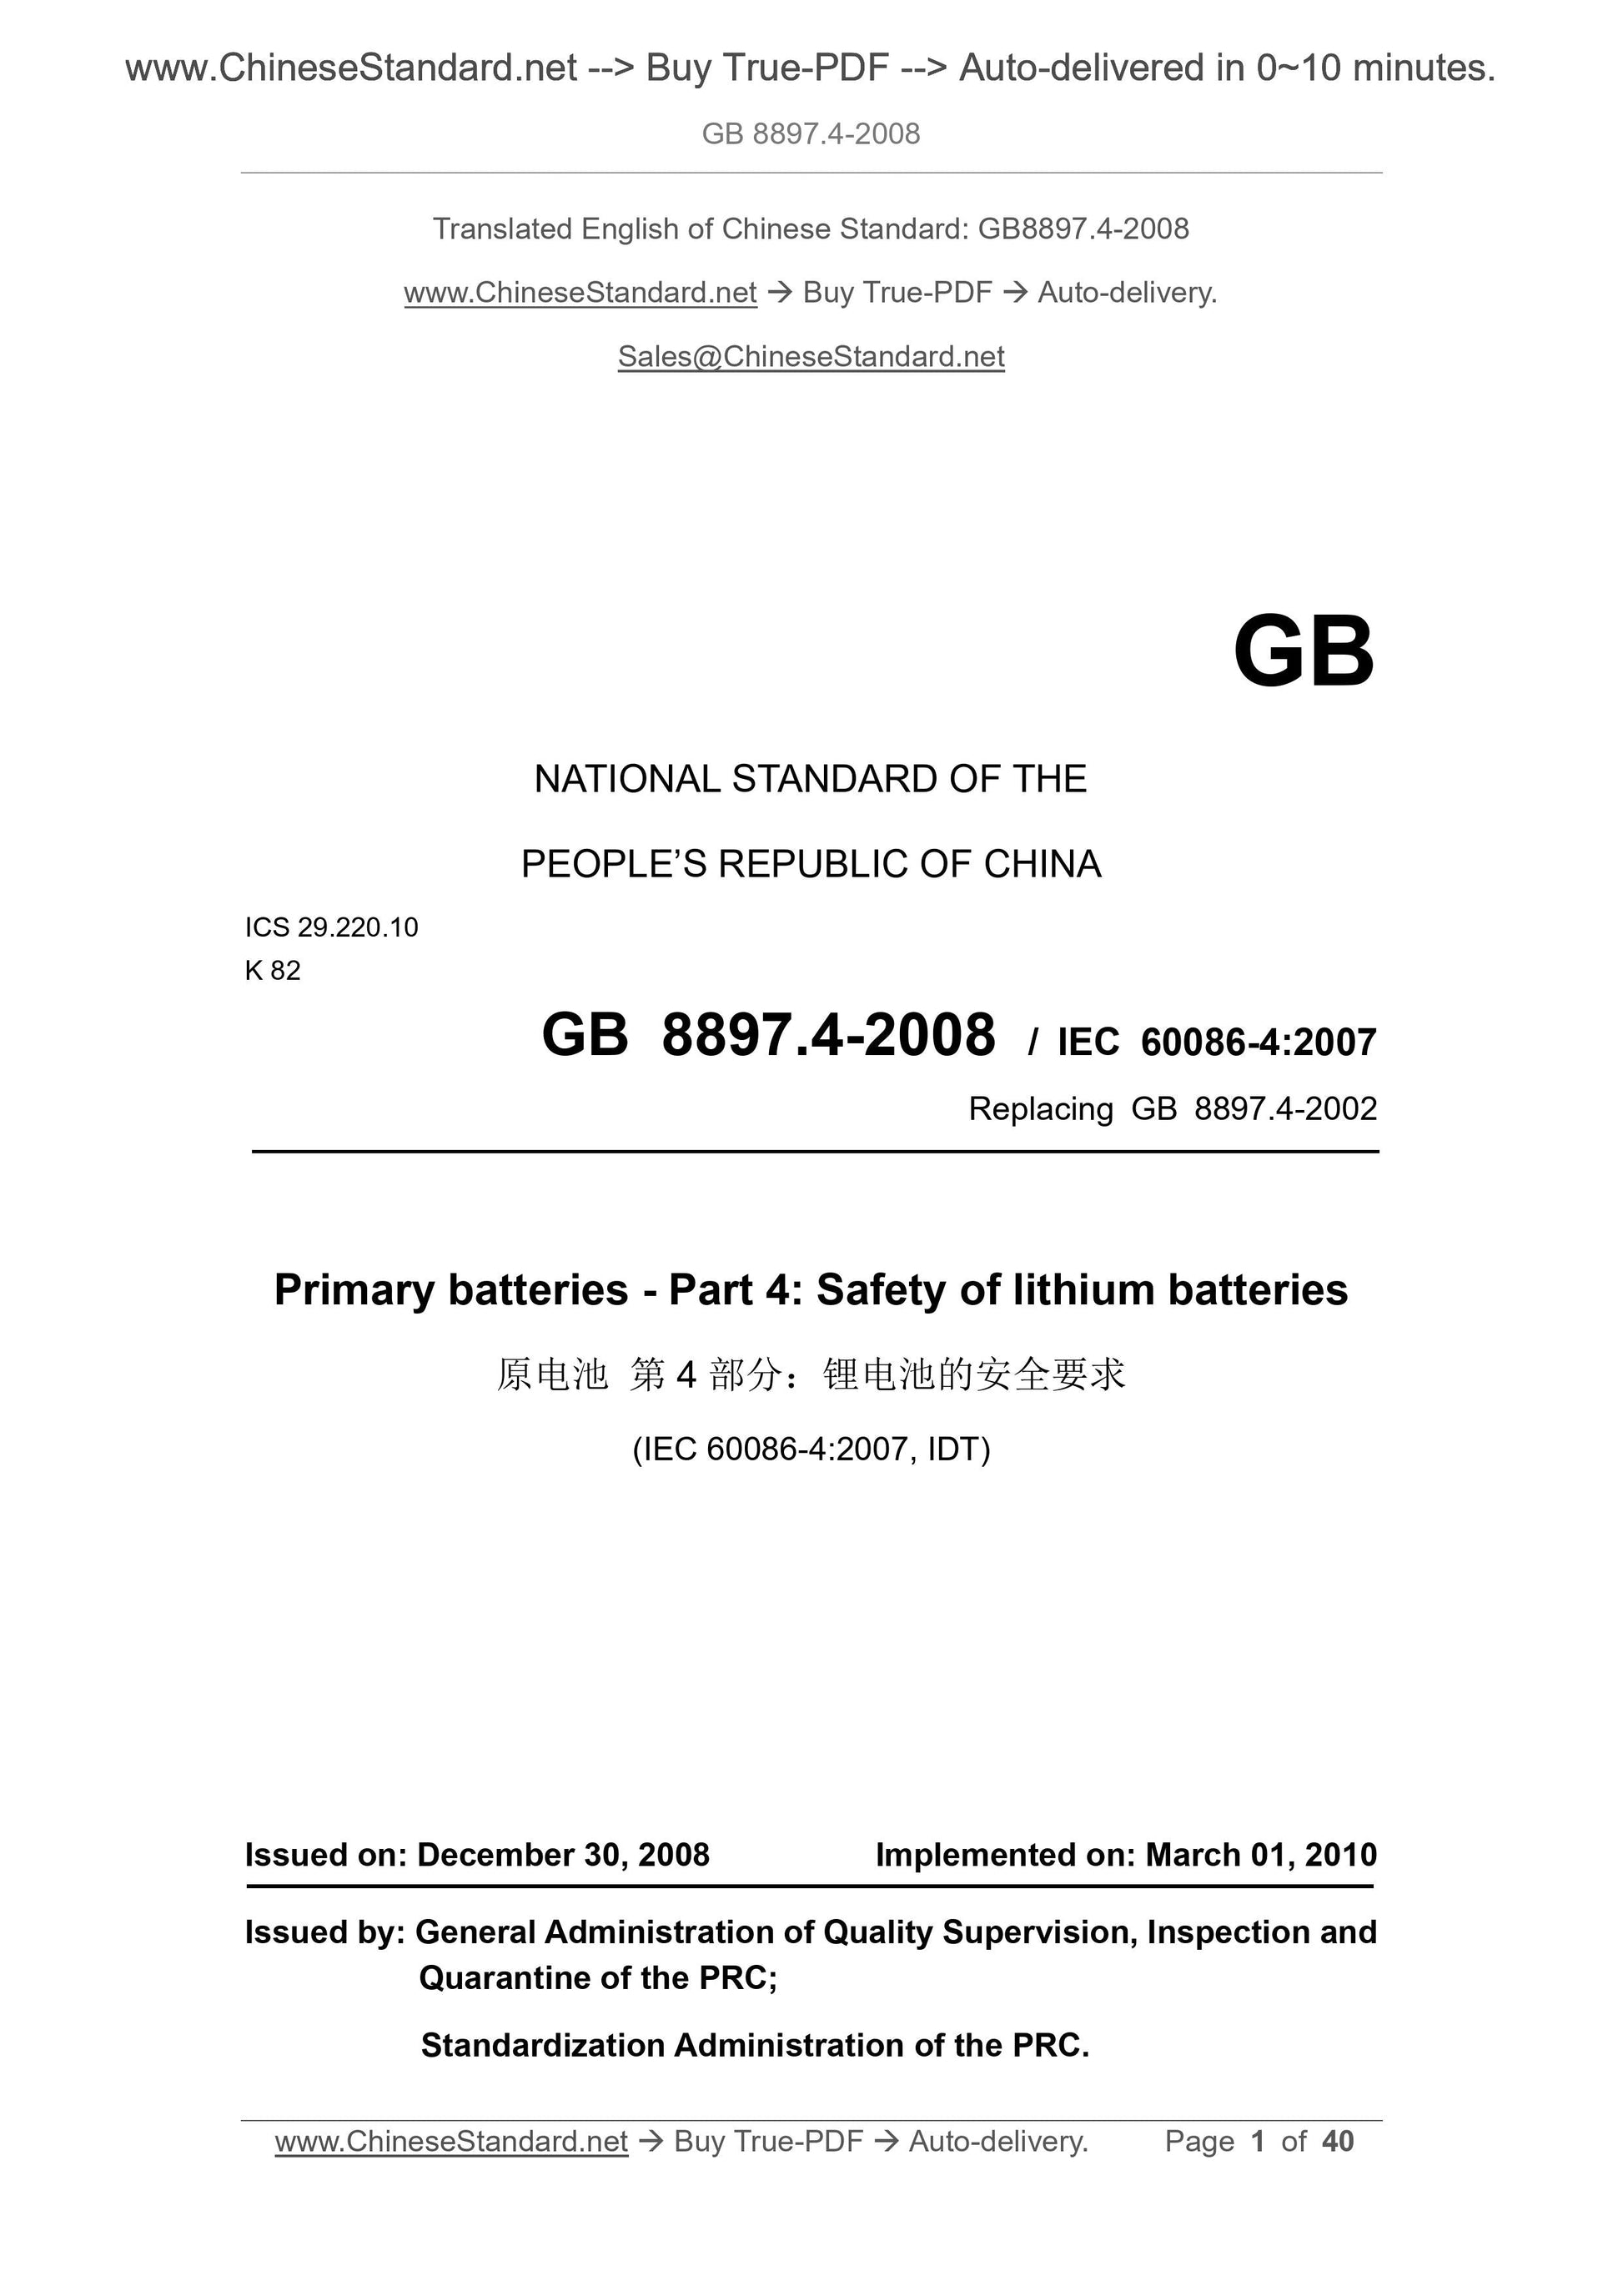 GB 8897.4-2008 Page 1